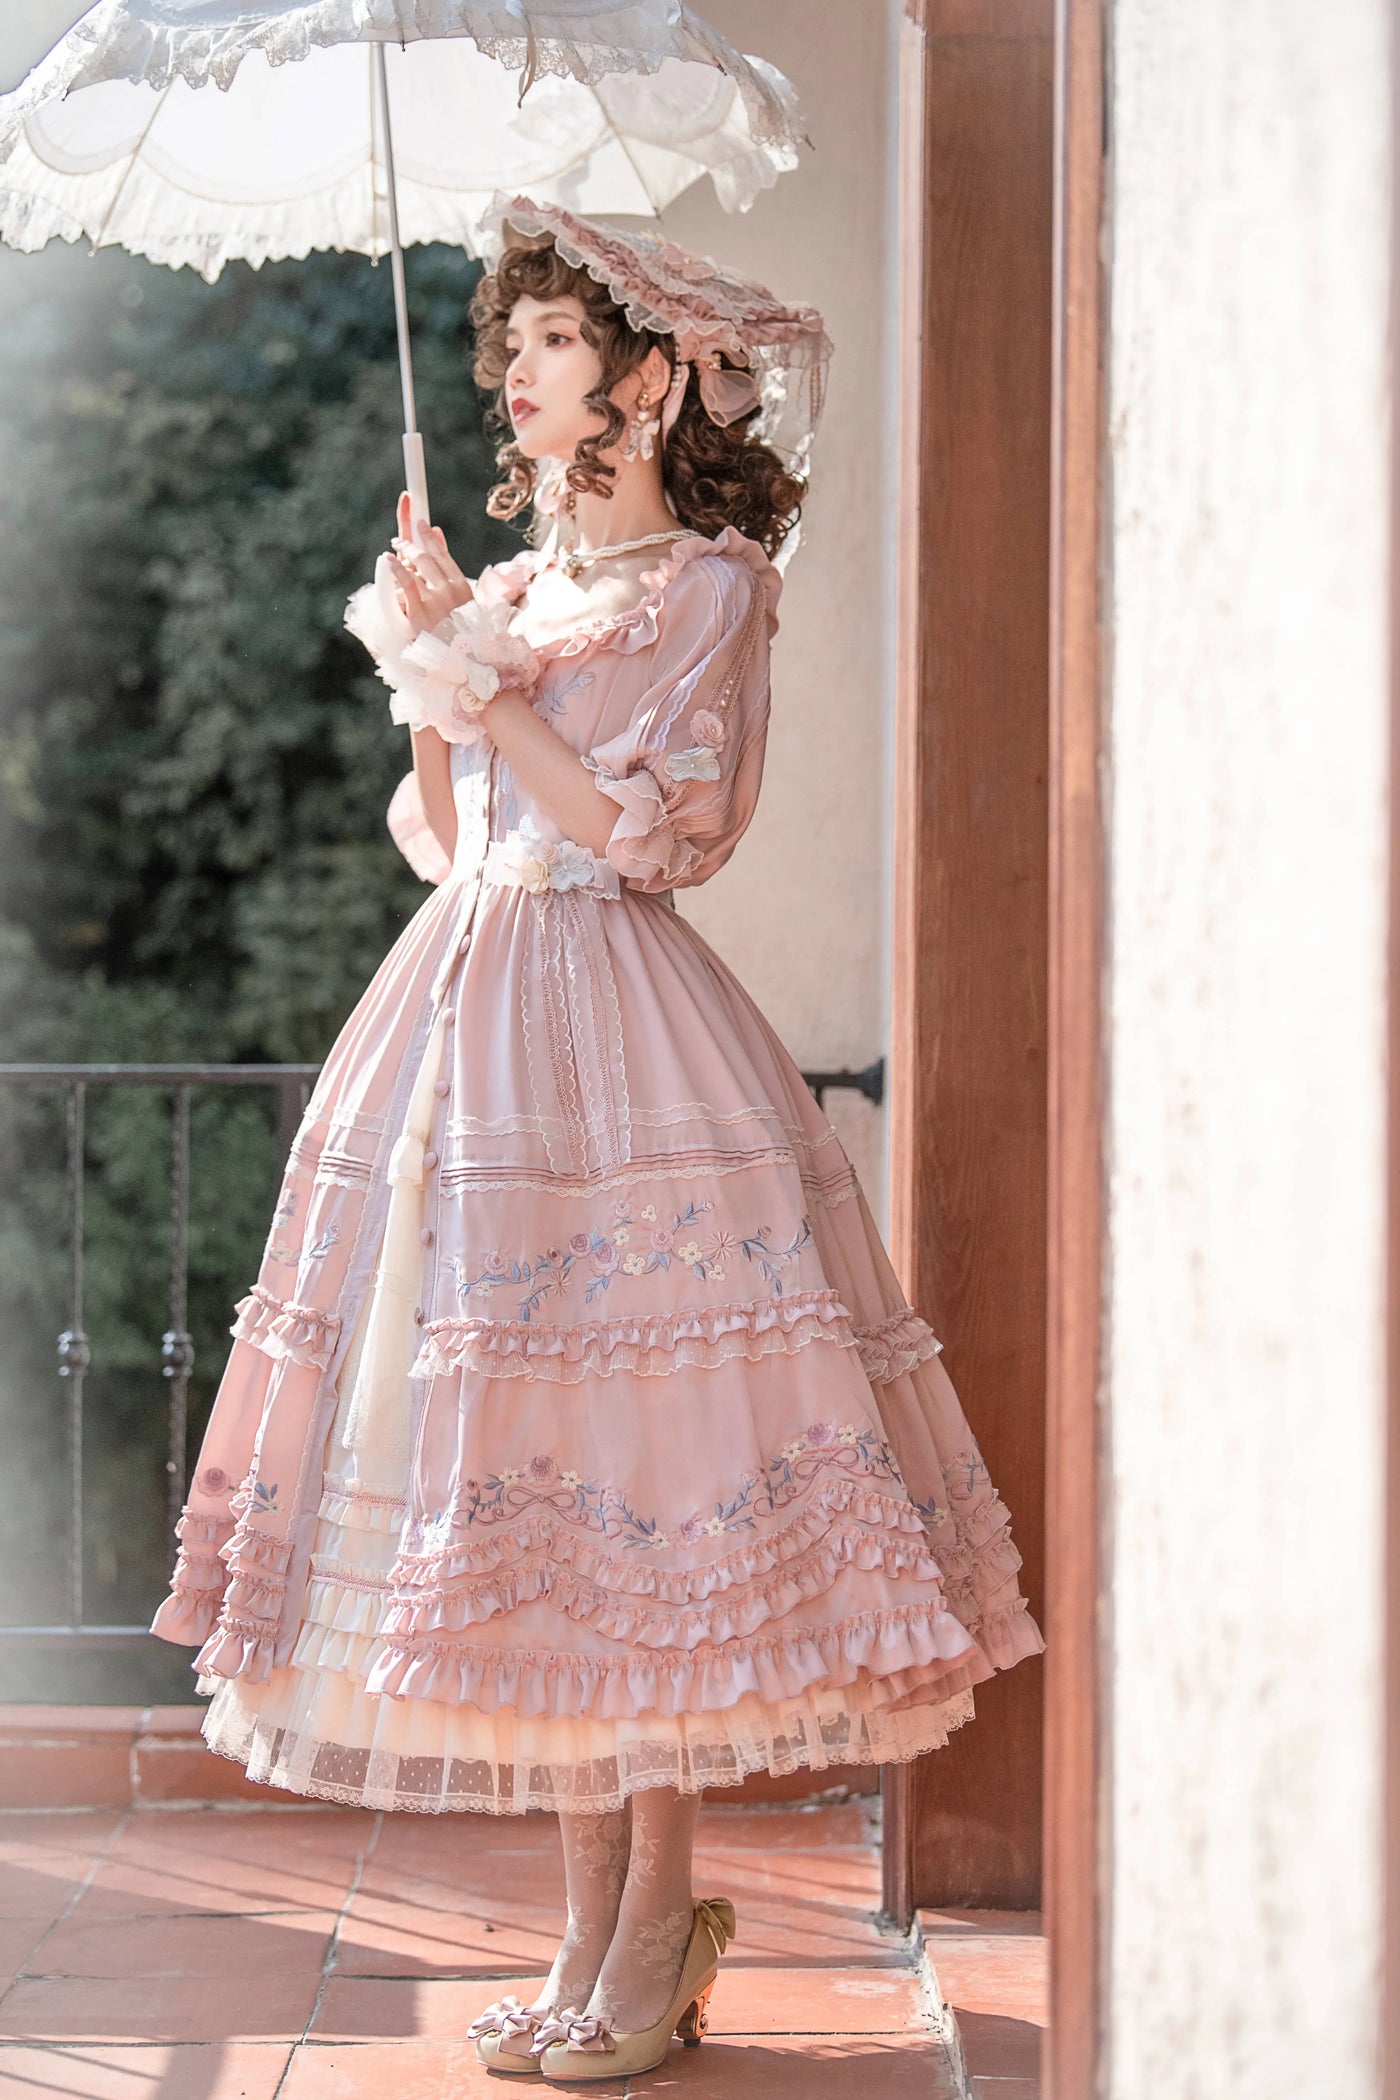 Two Rural Cats~Old Handicrafts~Country Lolita Daily Gorgeous Embroidery Dress   